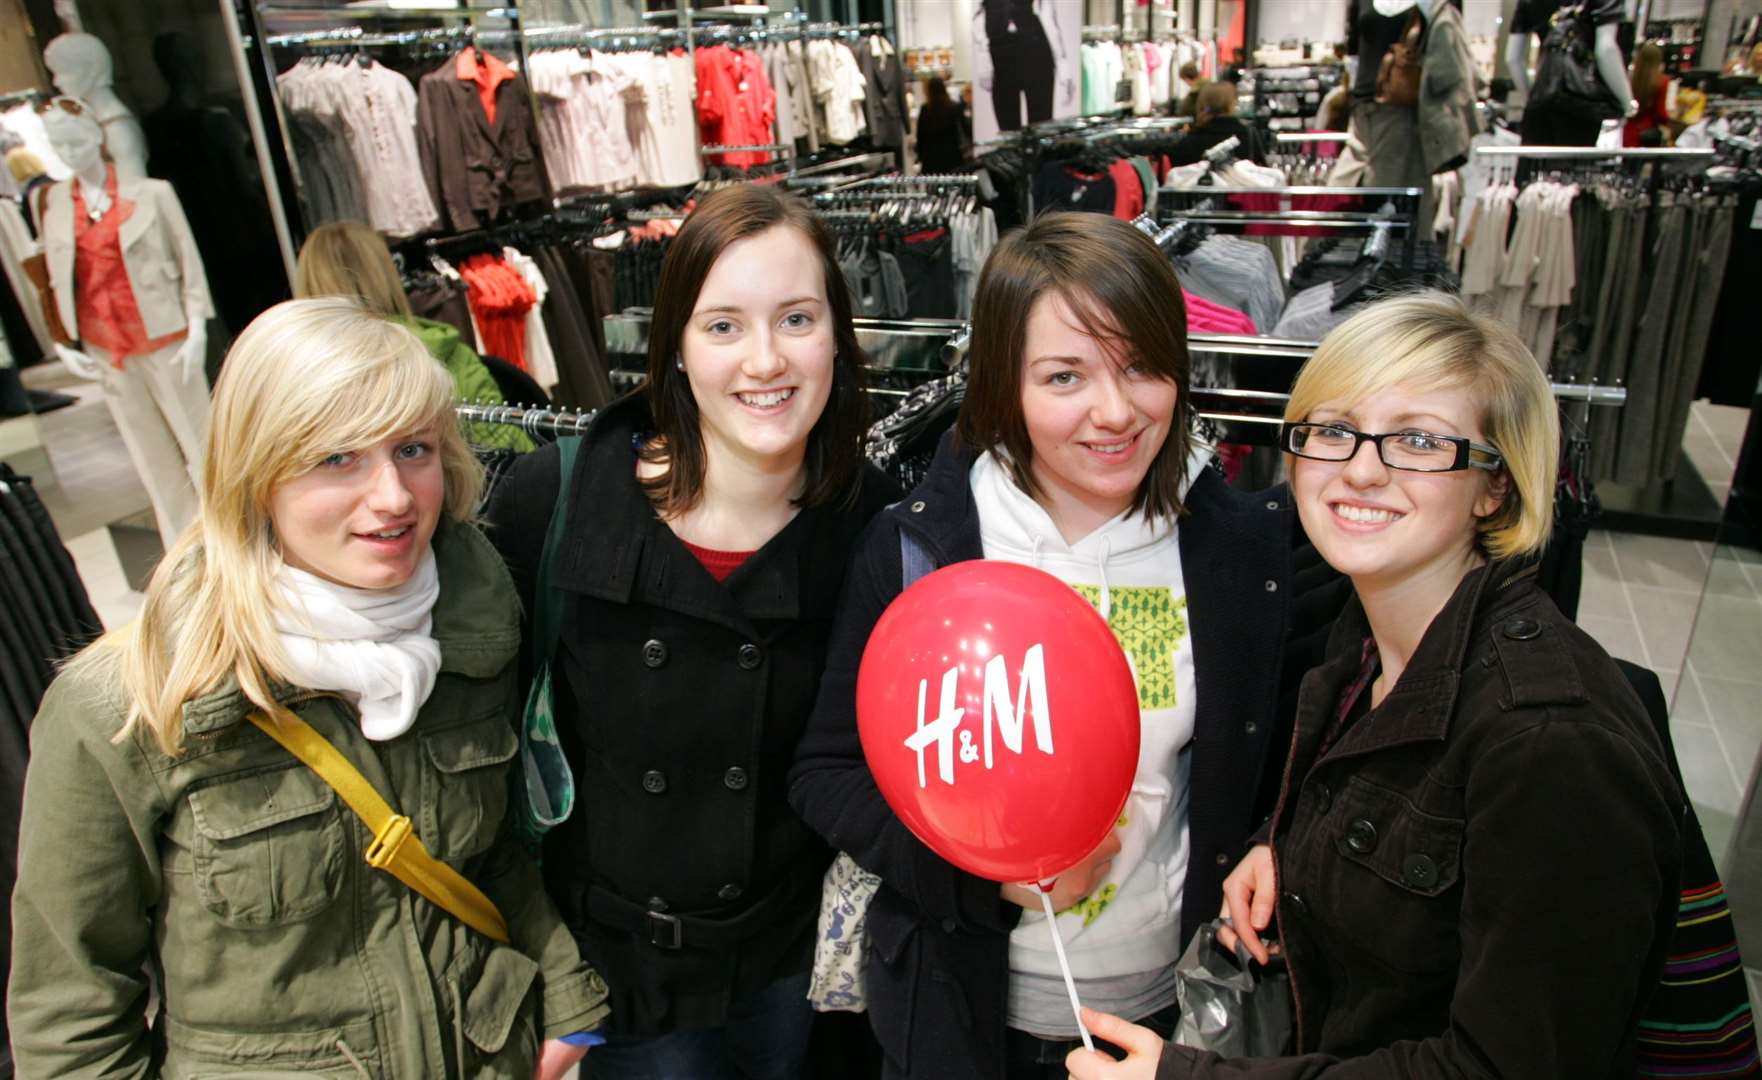 From left to right: Christine Sbielut, Sarah Ditcher, Ellie Ibbetson and Emily Hinckes inside Next in March 2008